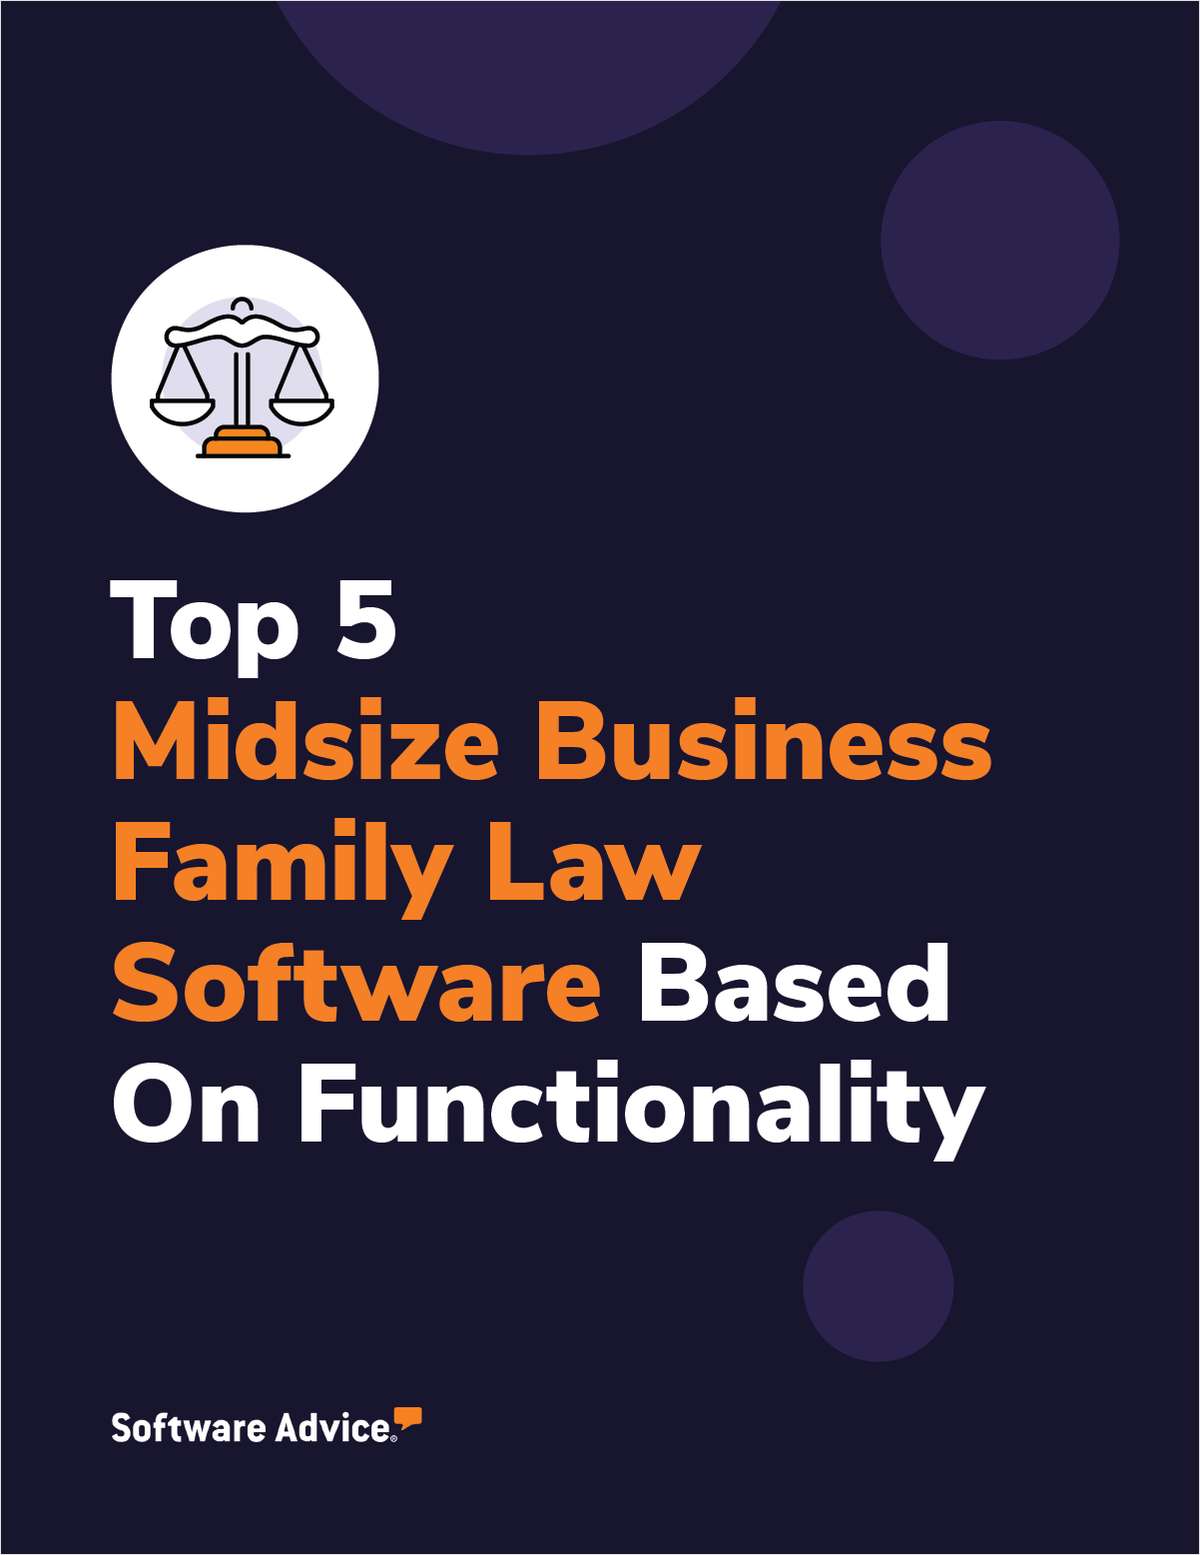 Top 5 Midsize Business Family Law Software With the Best User Reviewed Functionality